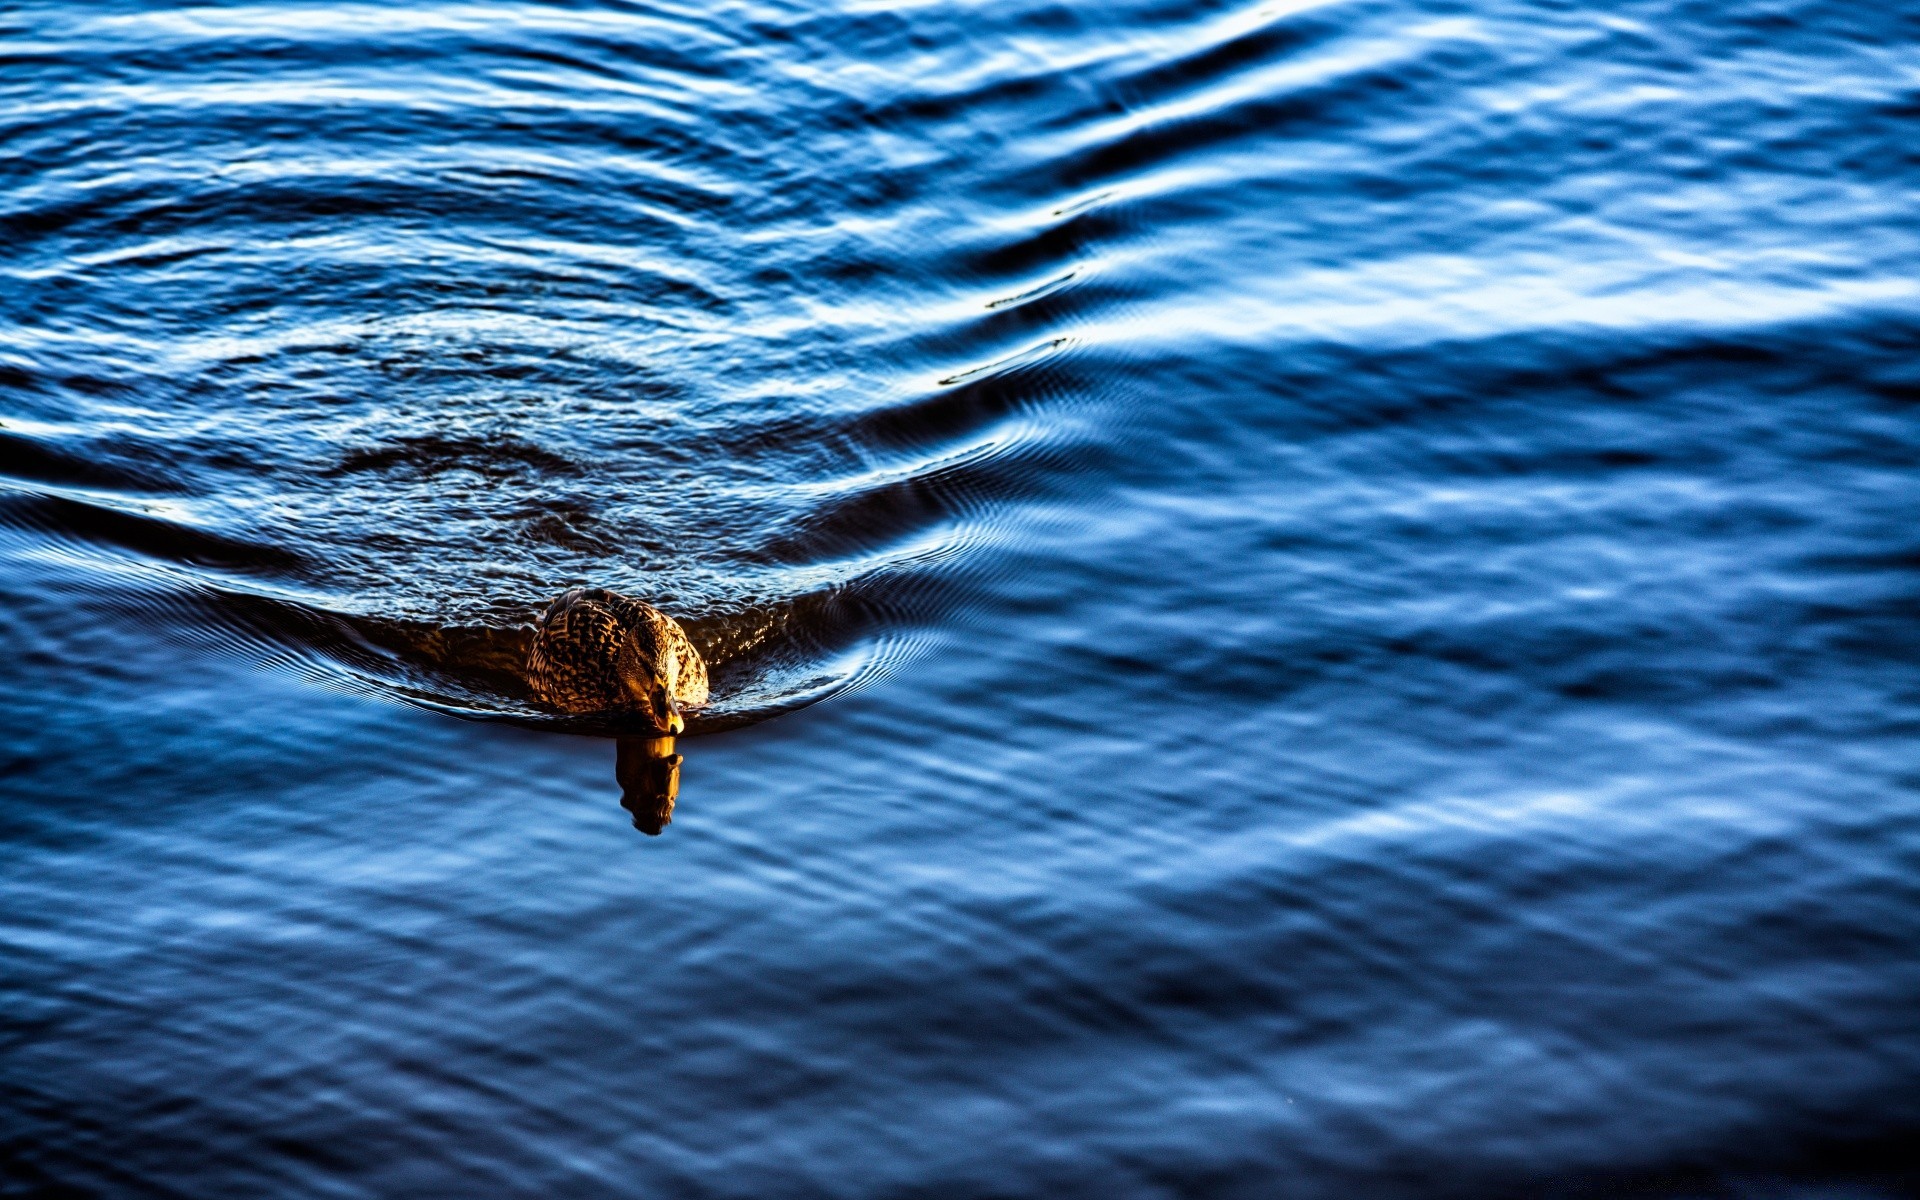 duck water nature ocean wave sea wet outdoors swimming ripple reflection marine